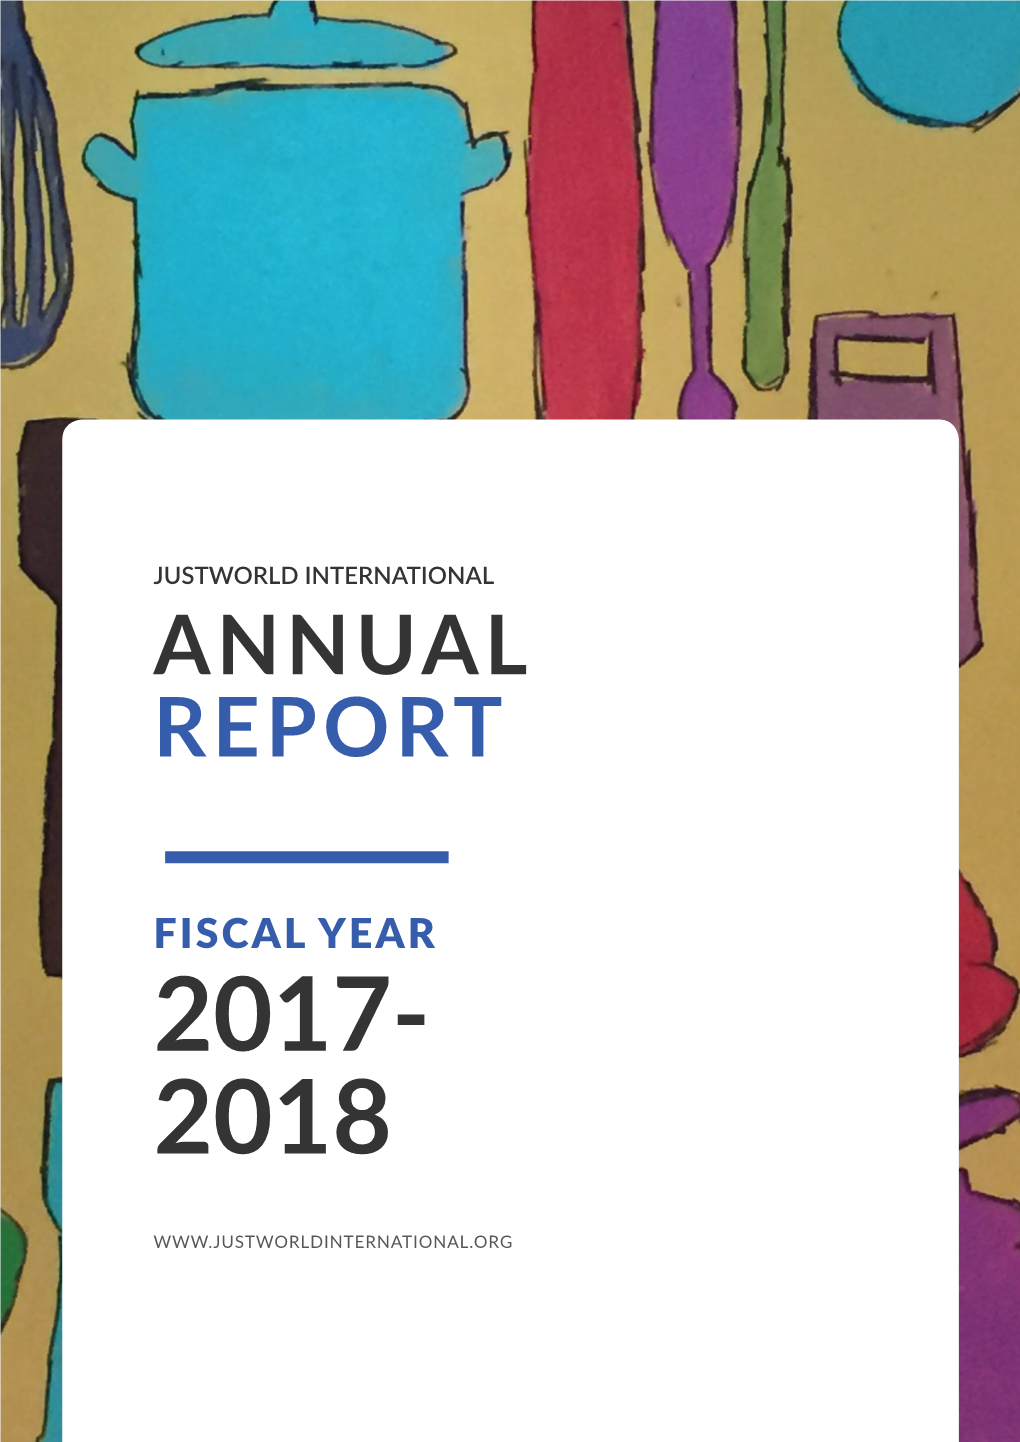 17-18 ANNUAL REPORT.Indd